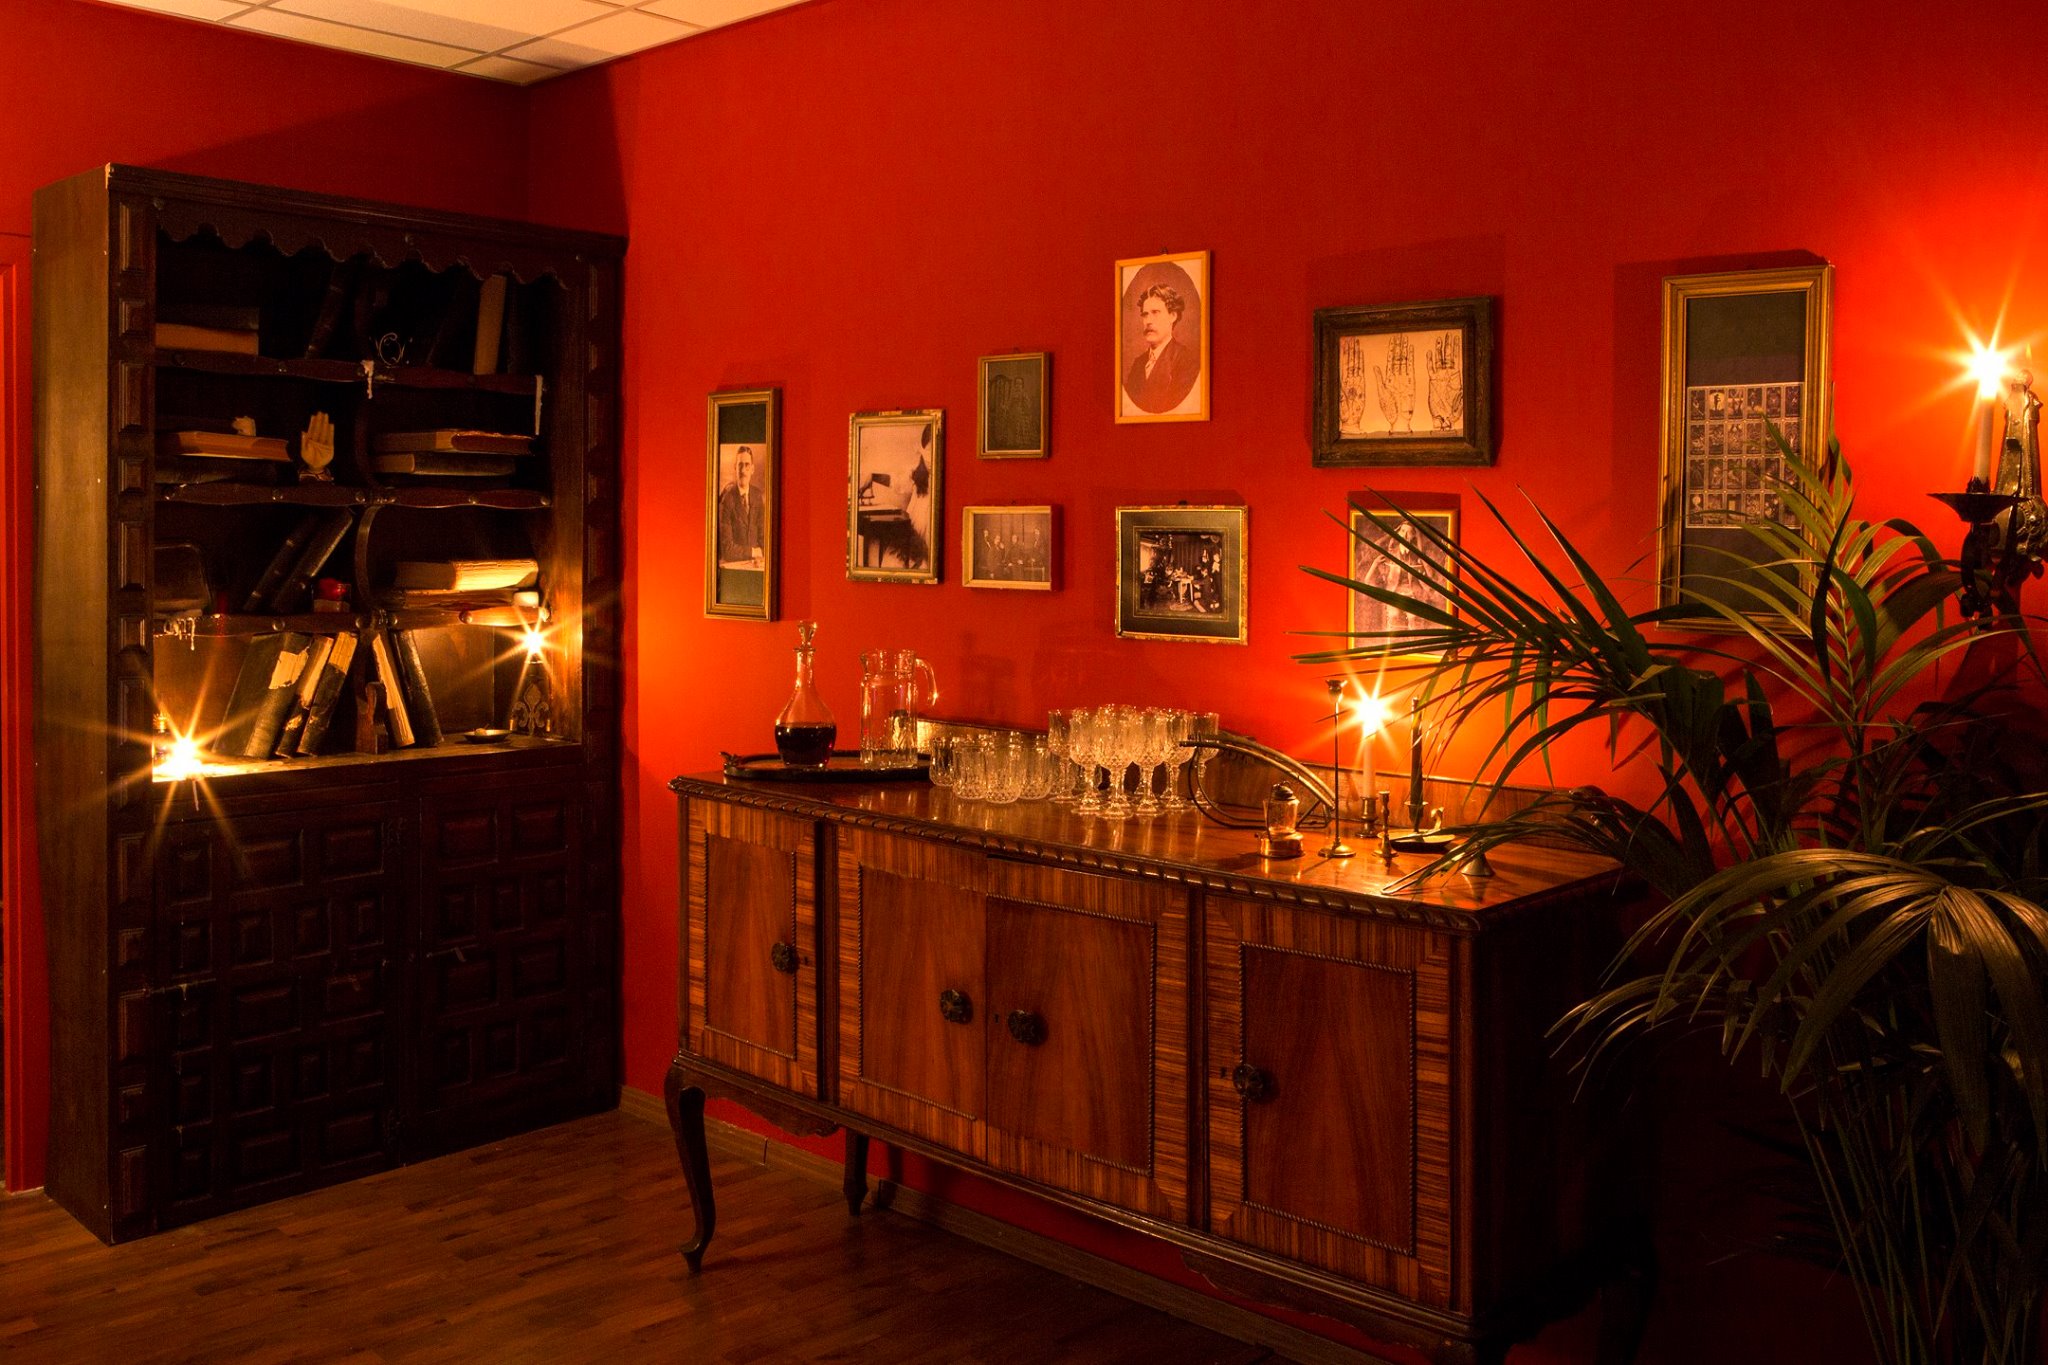 Old furniture, dim lighting, red walls. Bring on the spirits.  | Courtesy: Seance 